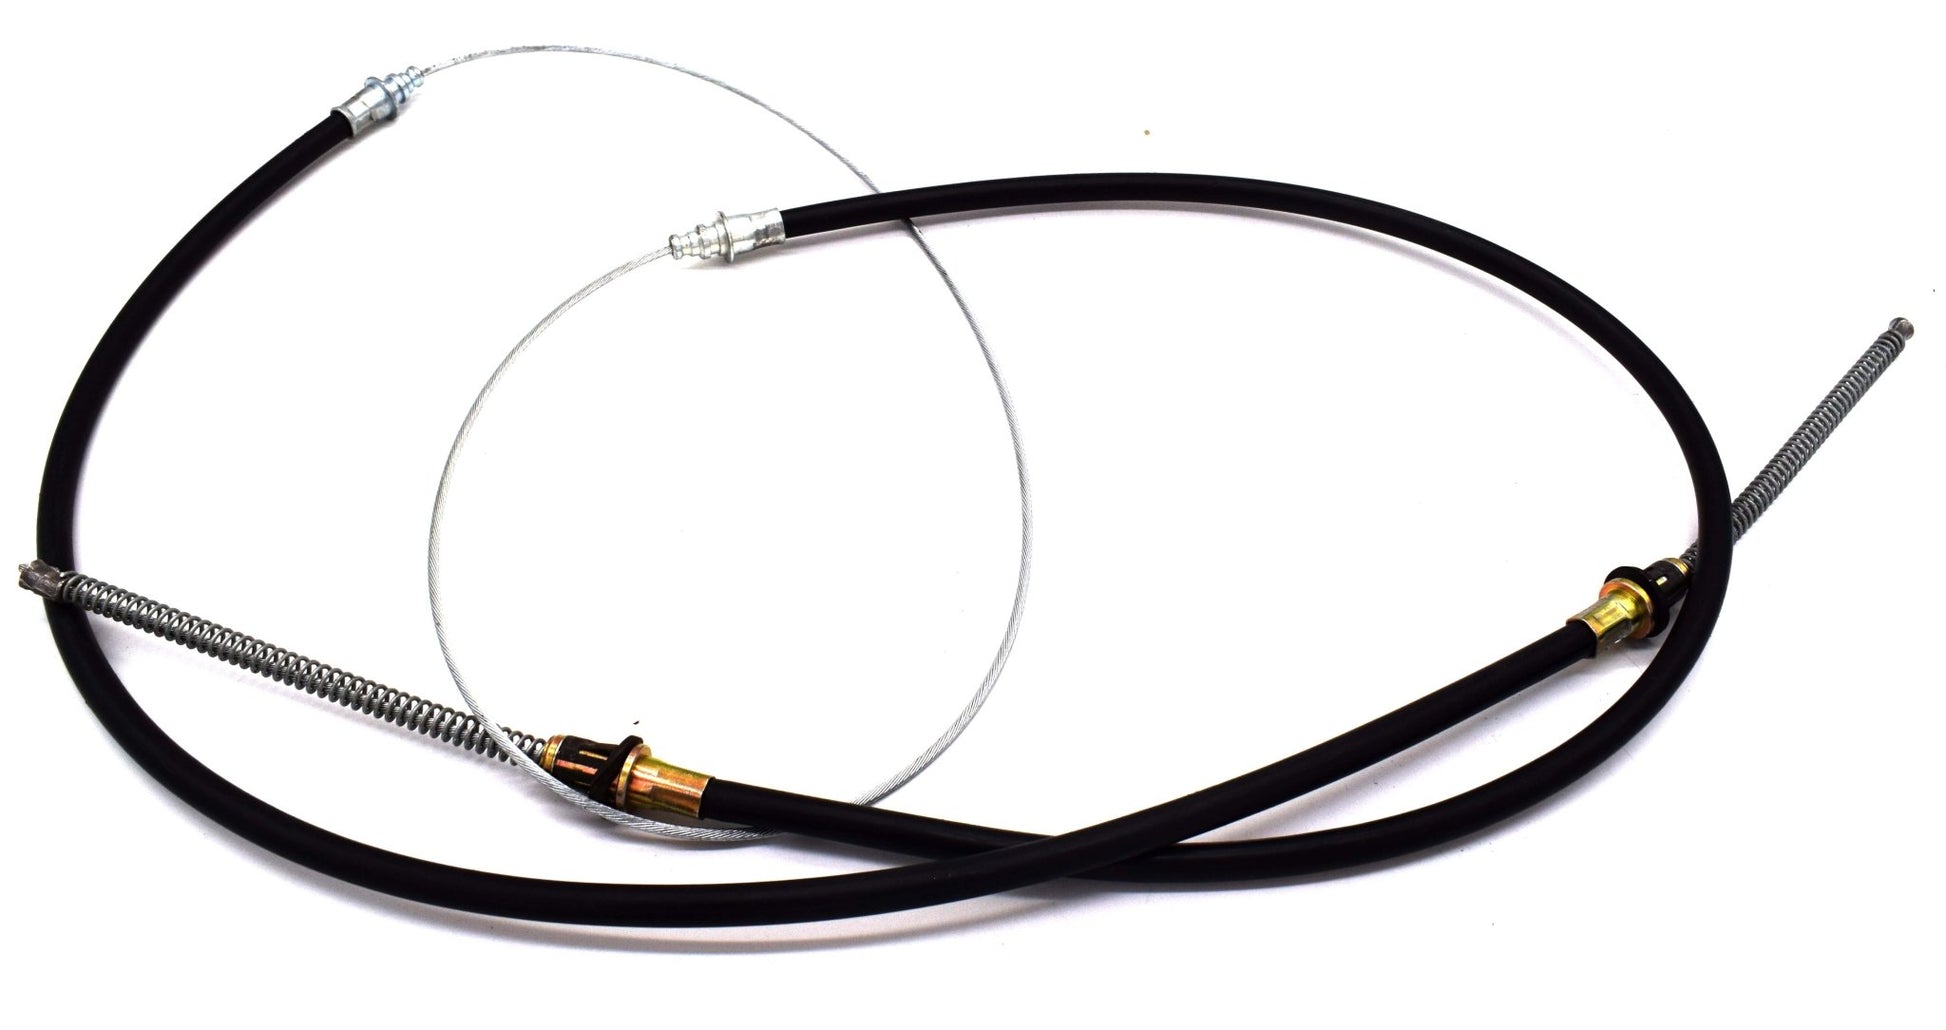 Rear Emergency Brake Cable, Automatic, 1967-1971, Jeepster Commando, 113 1/4' - The JeepsterMan